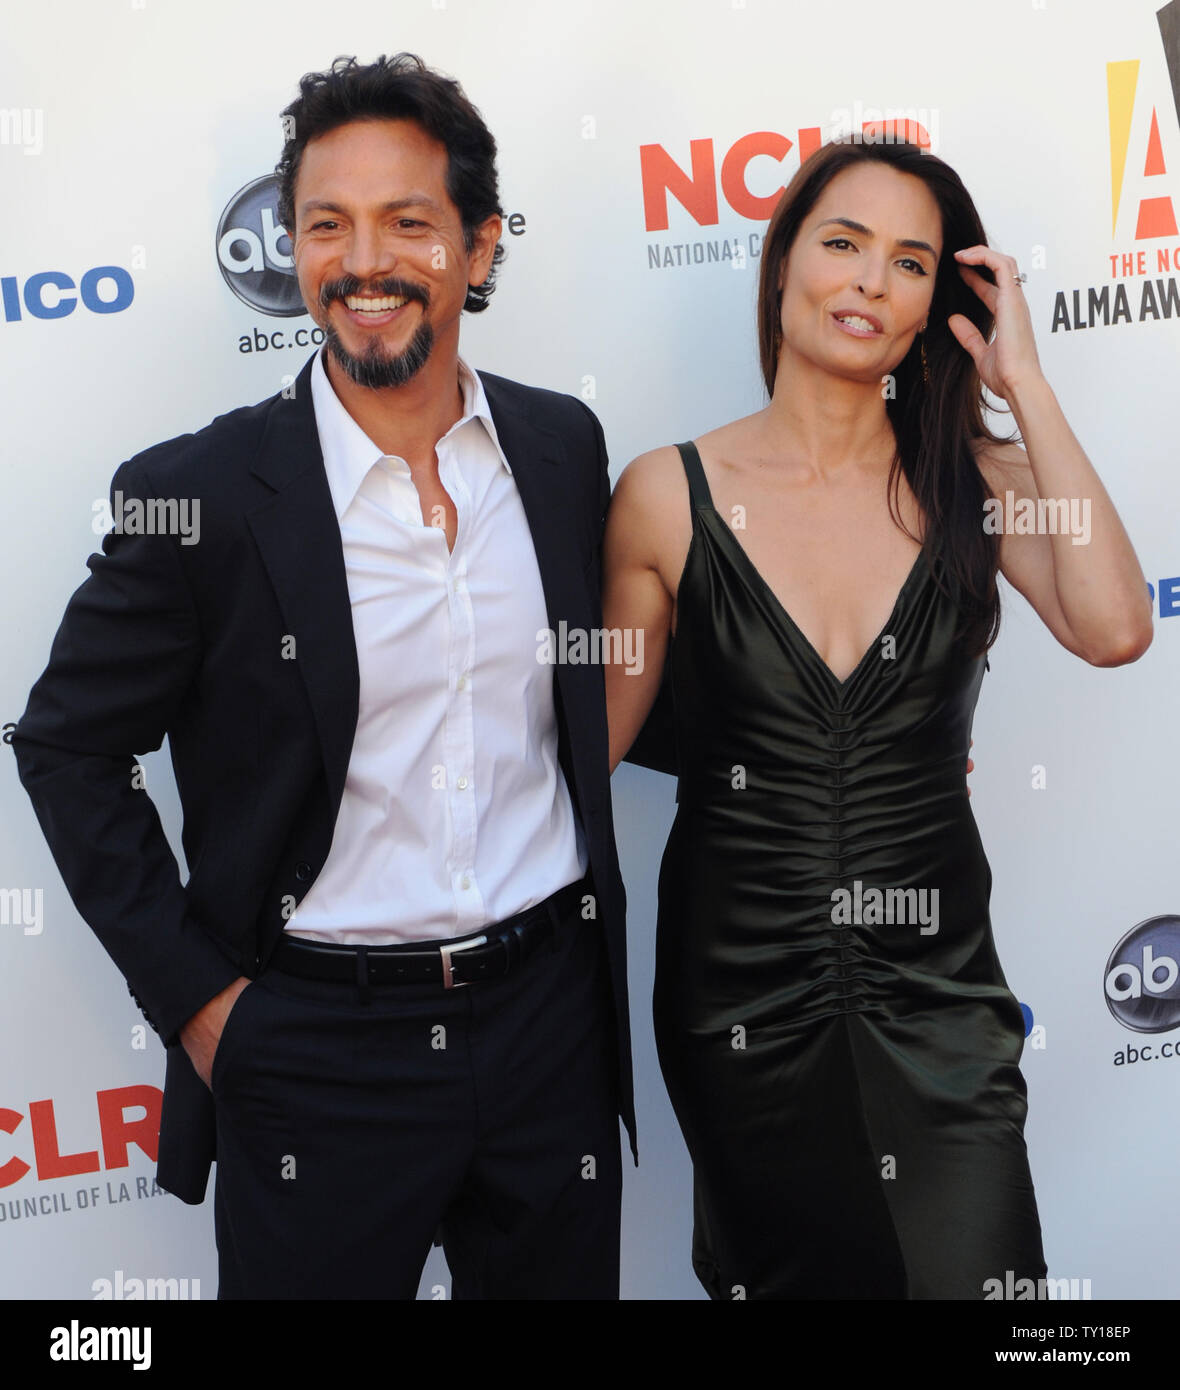 Benjamin Bratt and his wife Talisa Soto arrive for the ALMA Awards at UCLA's Royce Hall in the Westwood section of Los Angeles on September 17, 2009, in Los Angeles.     UPI/Jim Ruymen Stock Photo